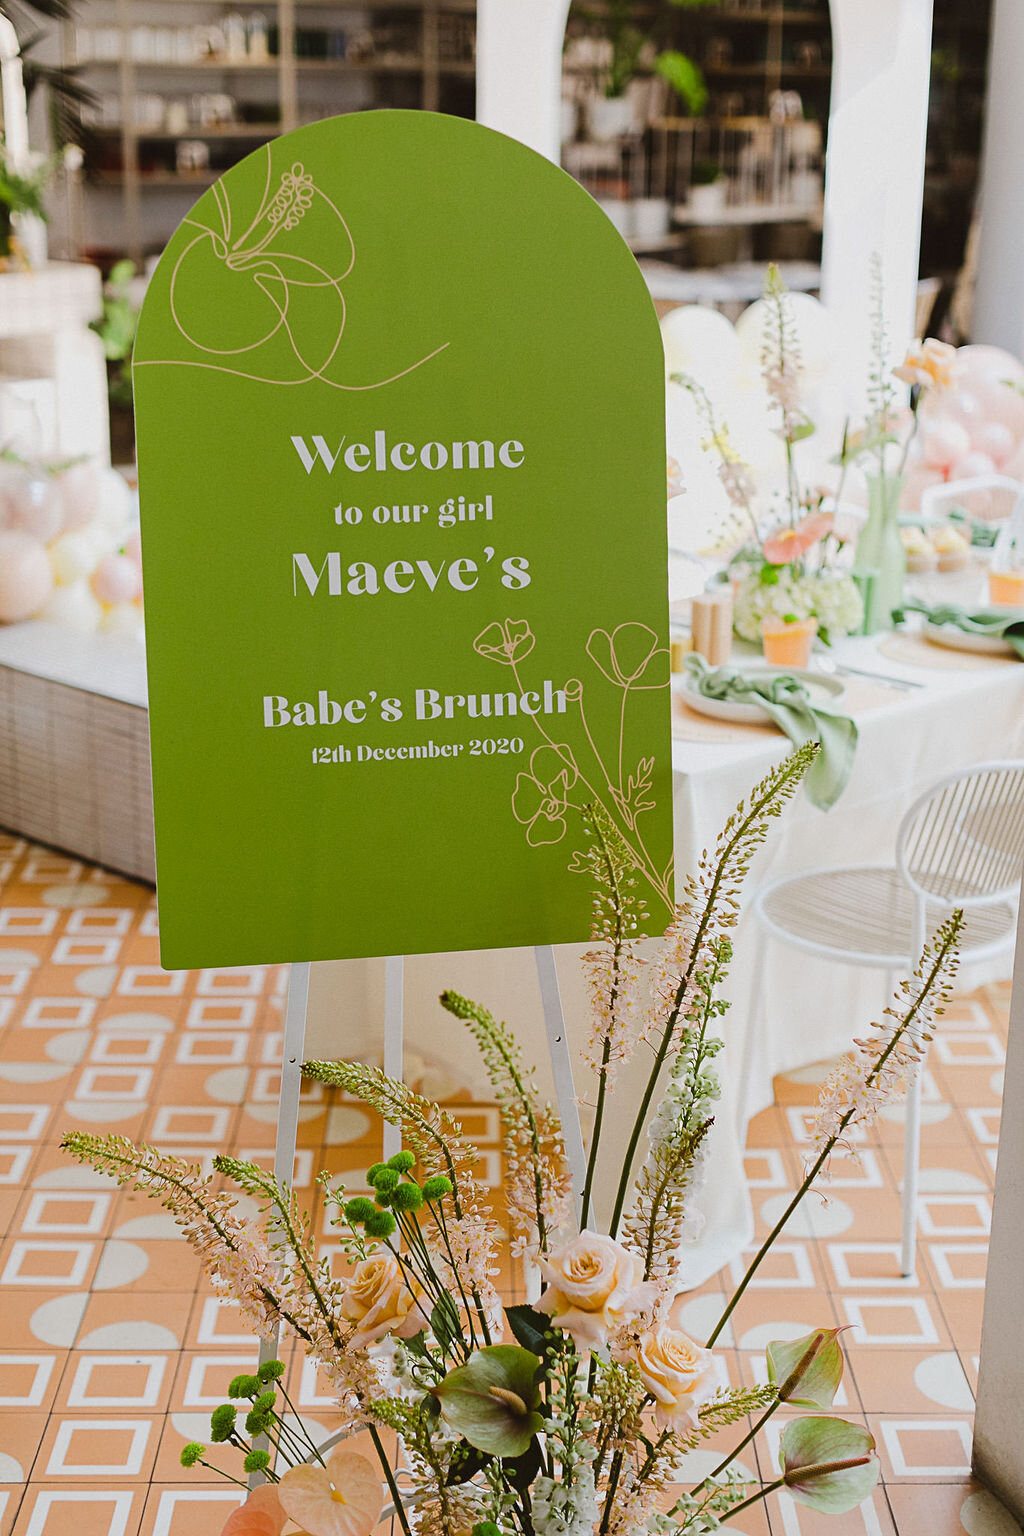 Matching the curves of the space, The Design Planner created bright and curvaceous signage with super chic, fine line floral art to set the tone for the day.